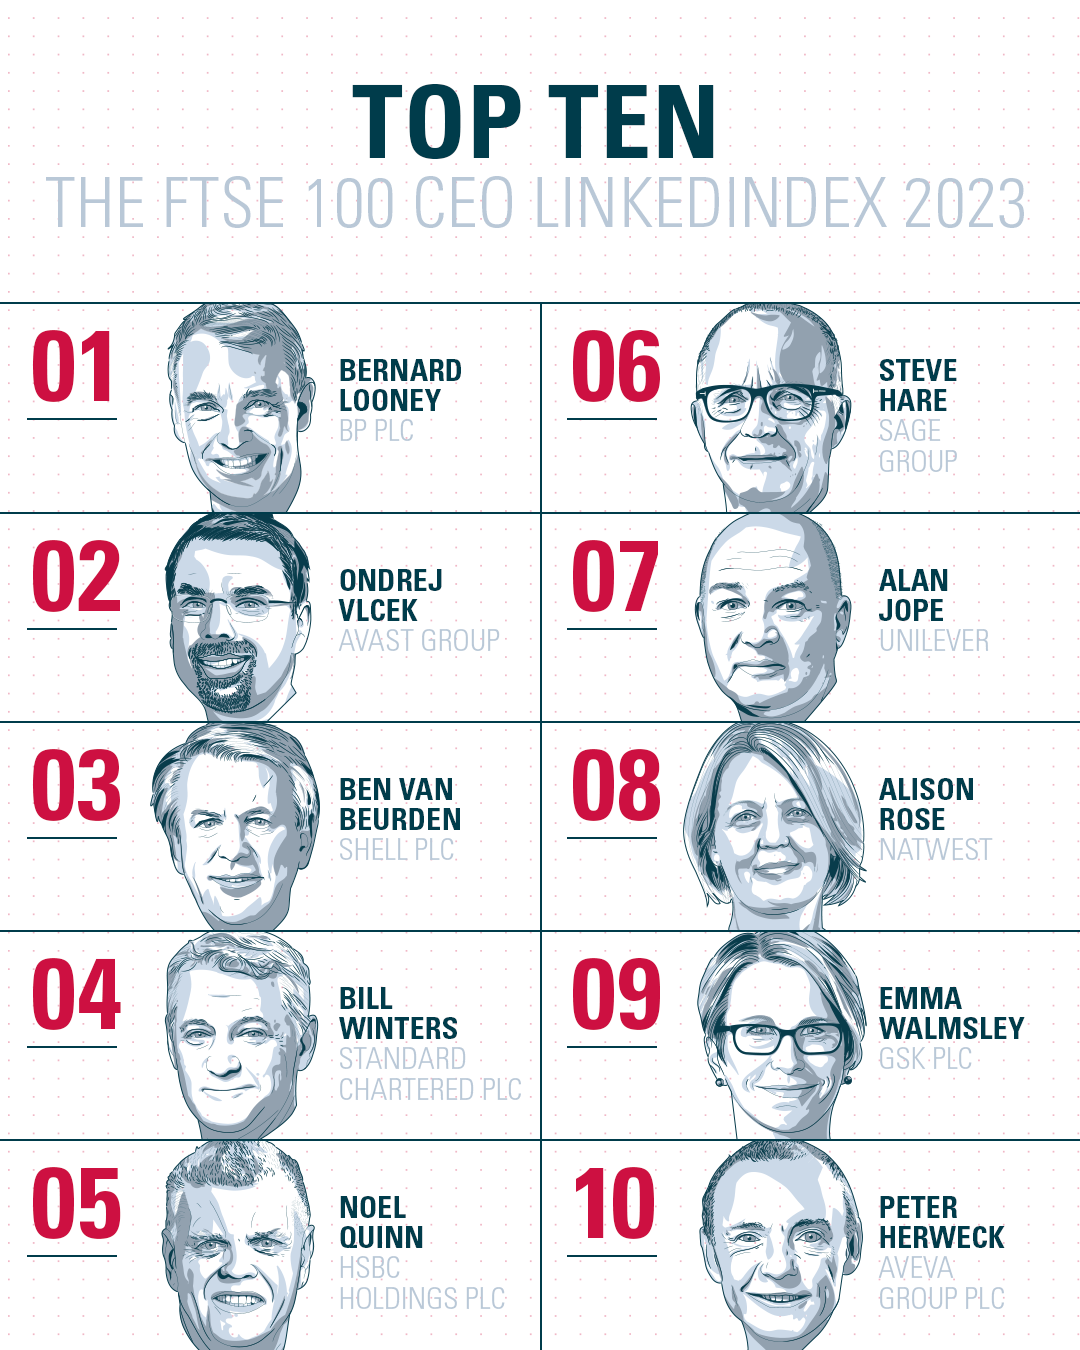 The list of the FTSE 100 Top 10 CEO LinkedIndex 2023